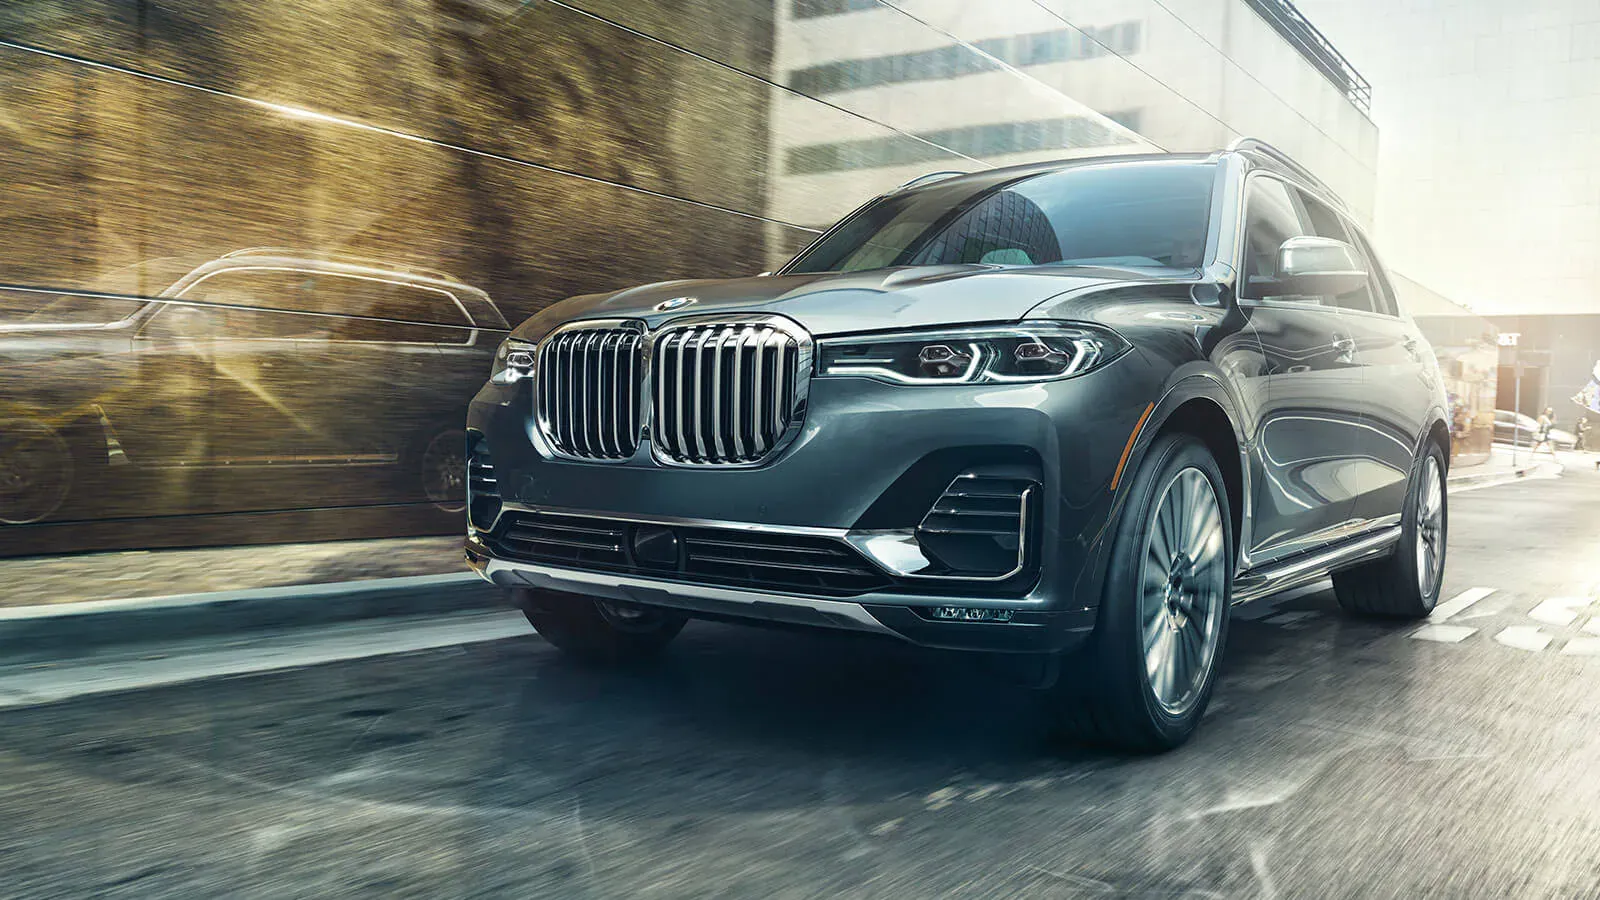 2022 BMW X7 On The Road